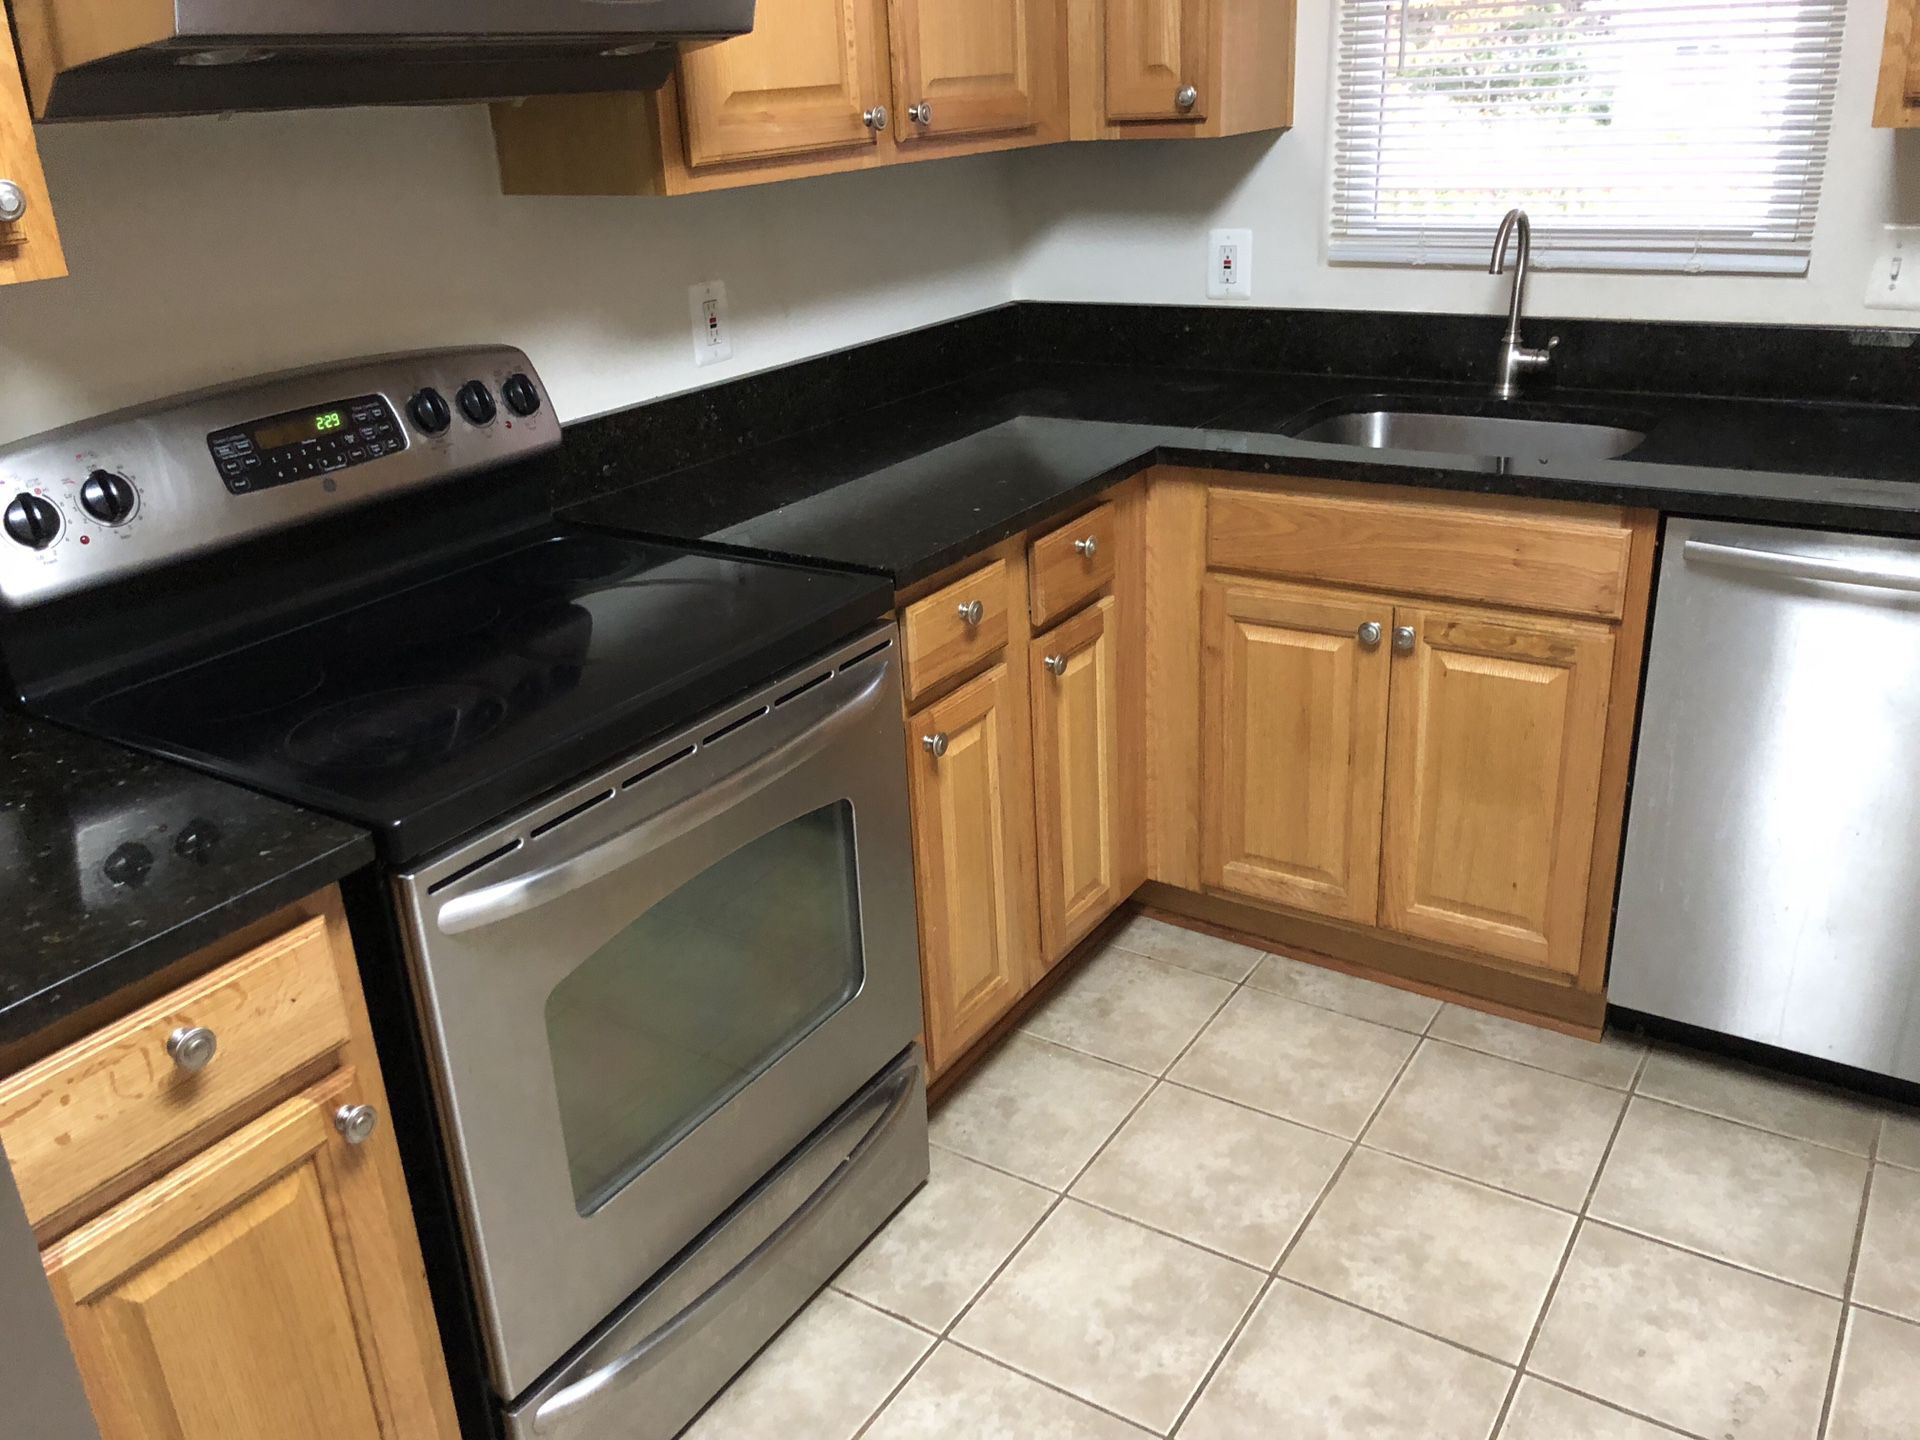 Kitchen cabinets and granite used in great condition